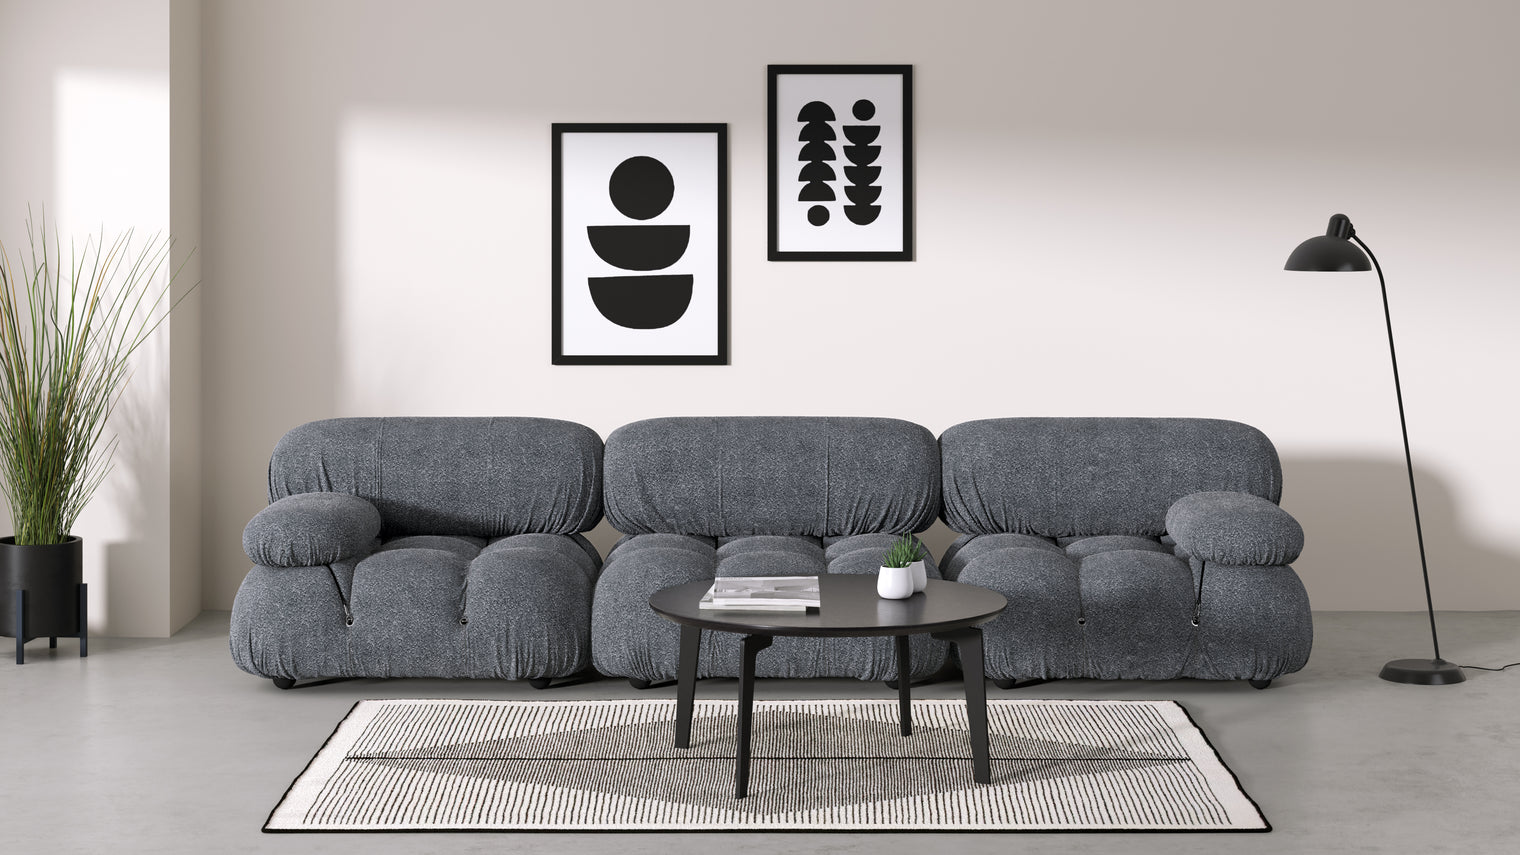 Stylish Sectional|With the Belia’s sectional design, you can create a sofa that suits your space. The soft curves of each carefully crafted cushion create a luxurious and comfortable seat for the ultimate in stylish comfort.
